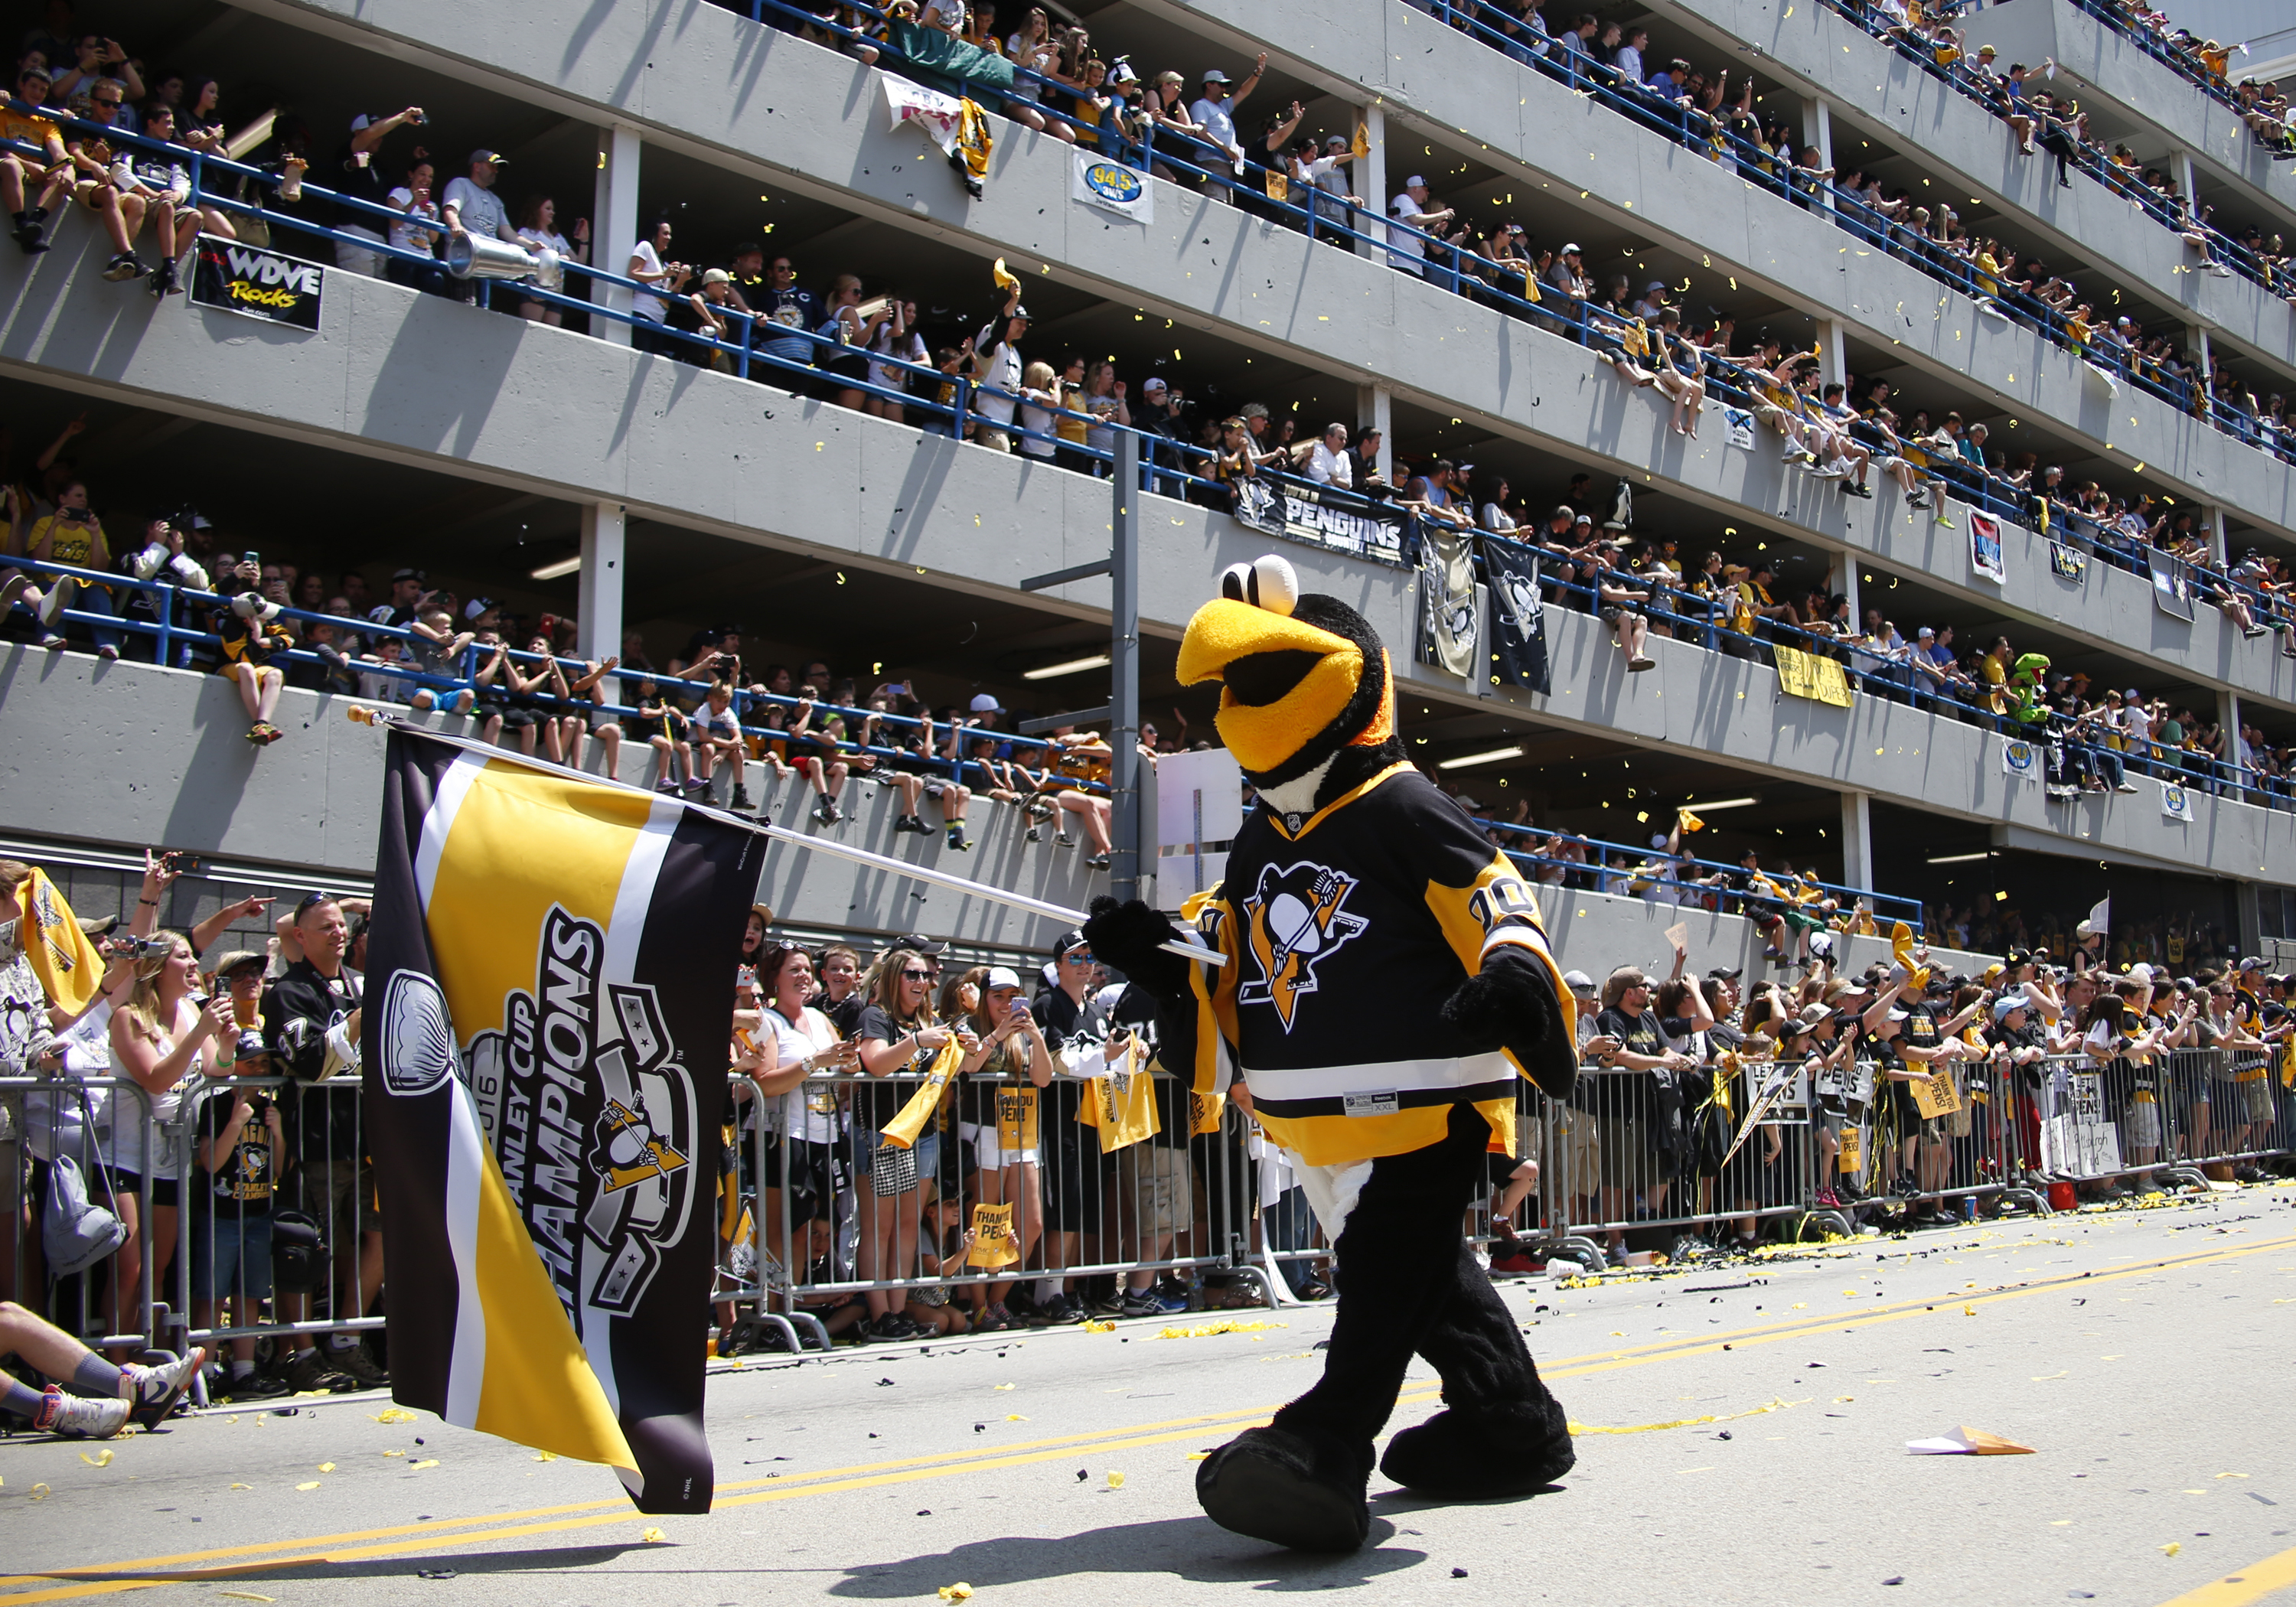 Iceburgh marches through the streets of downtown Pittsburgh in the 2016 Stanley Cup Victory Parade as a large crowd of fans cheers from the side of the road